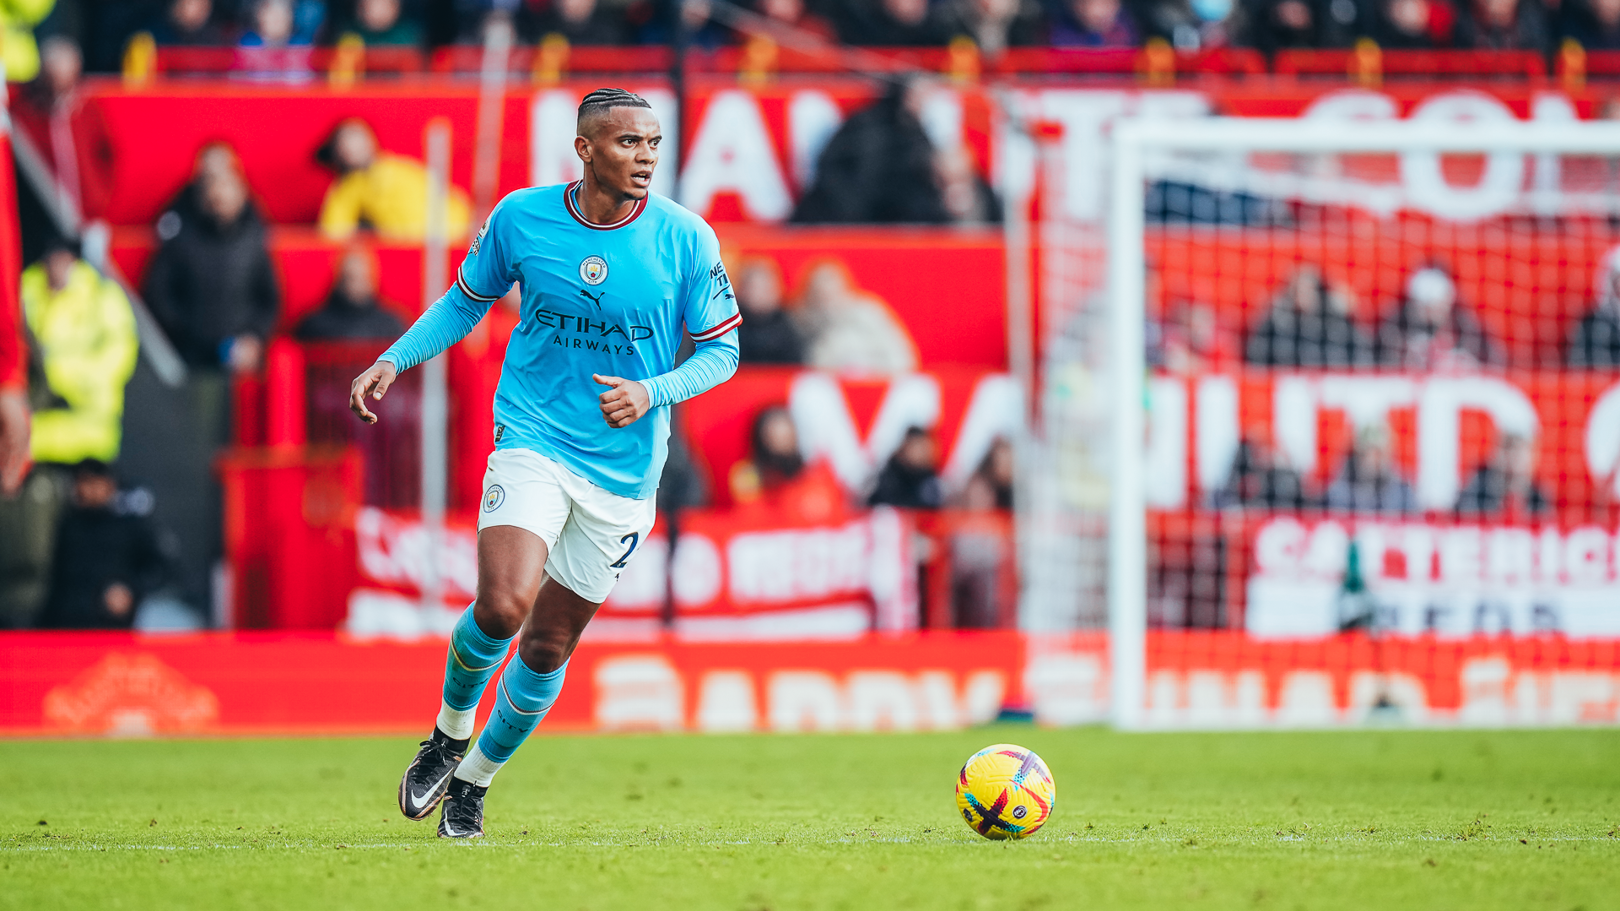 Akanji: Spurs clash a chance to demonstrate our quality